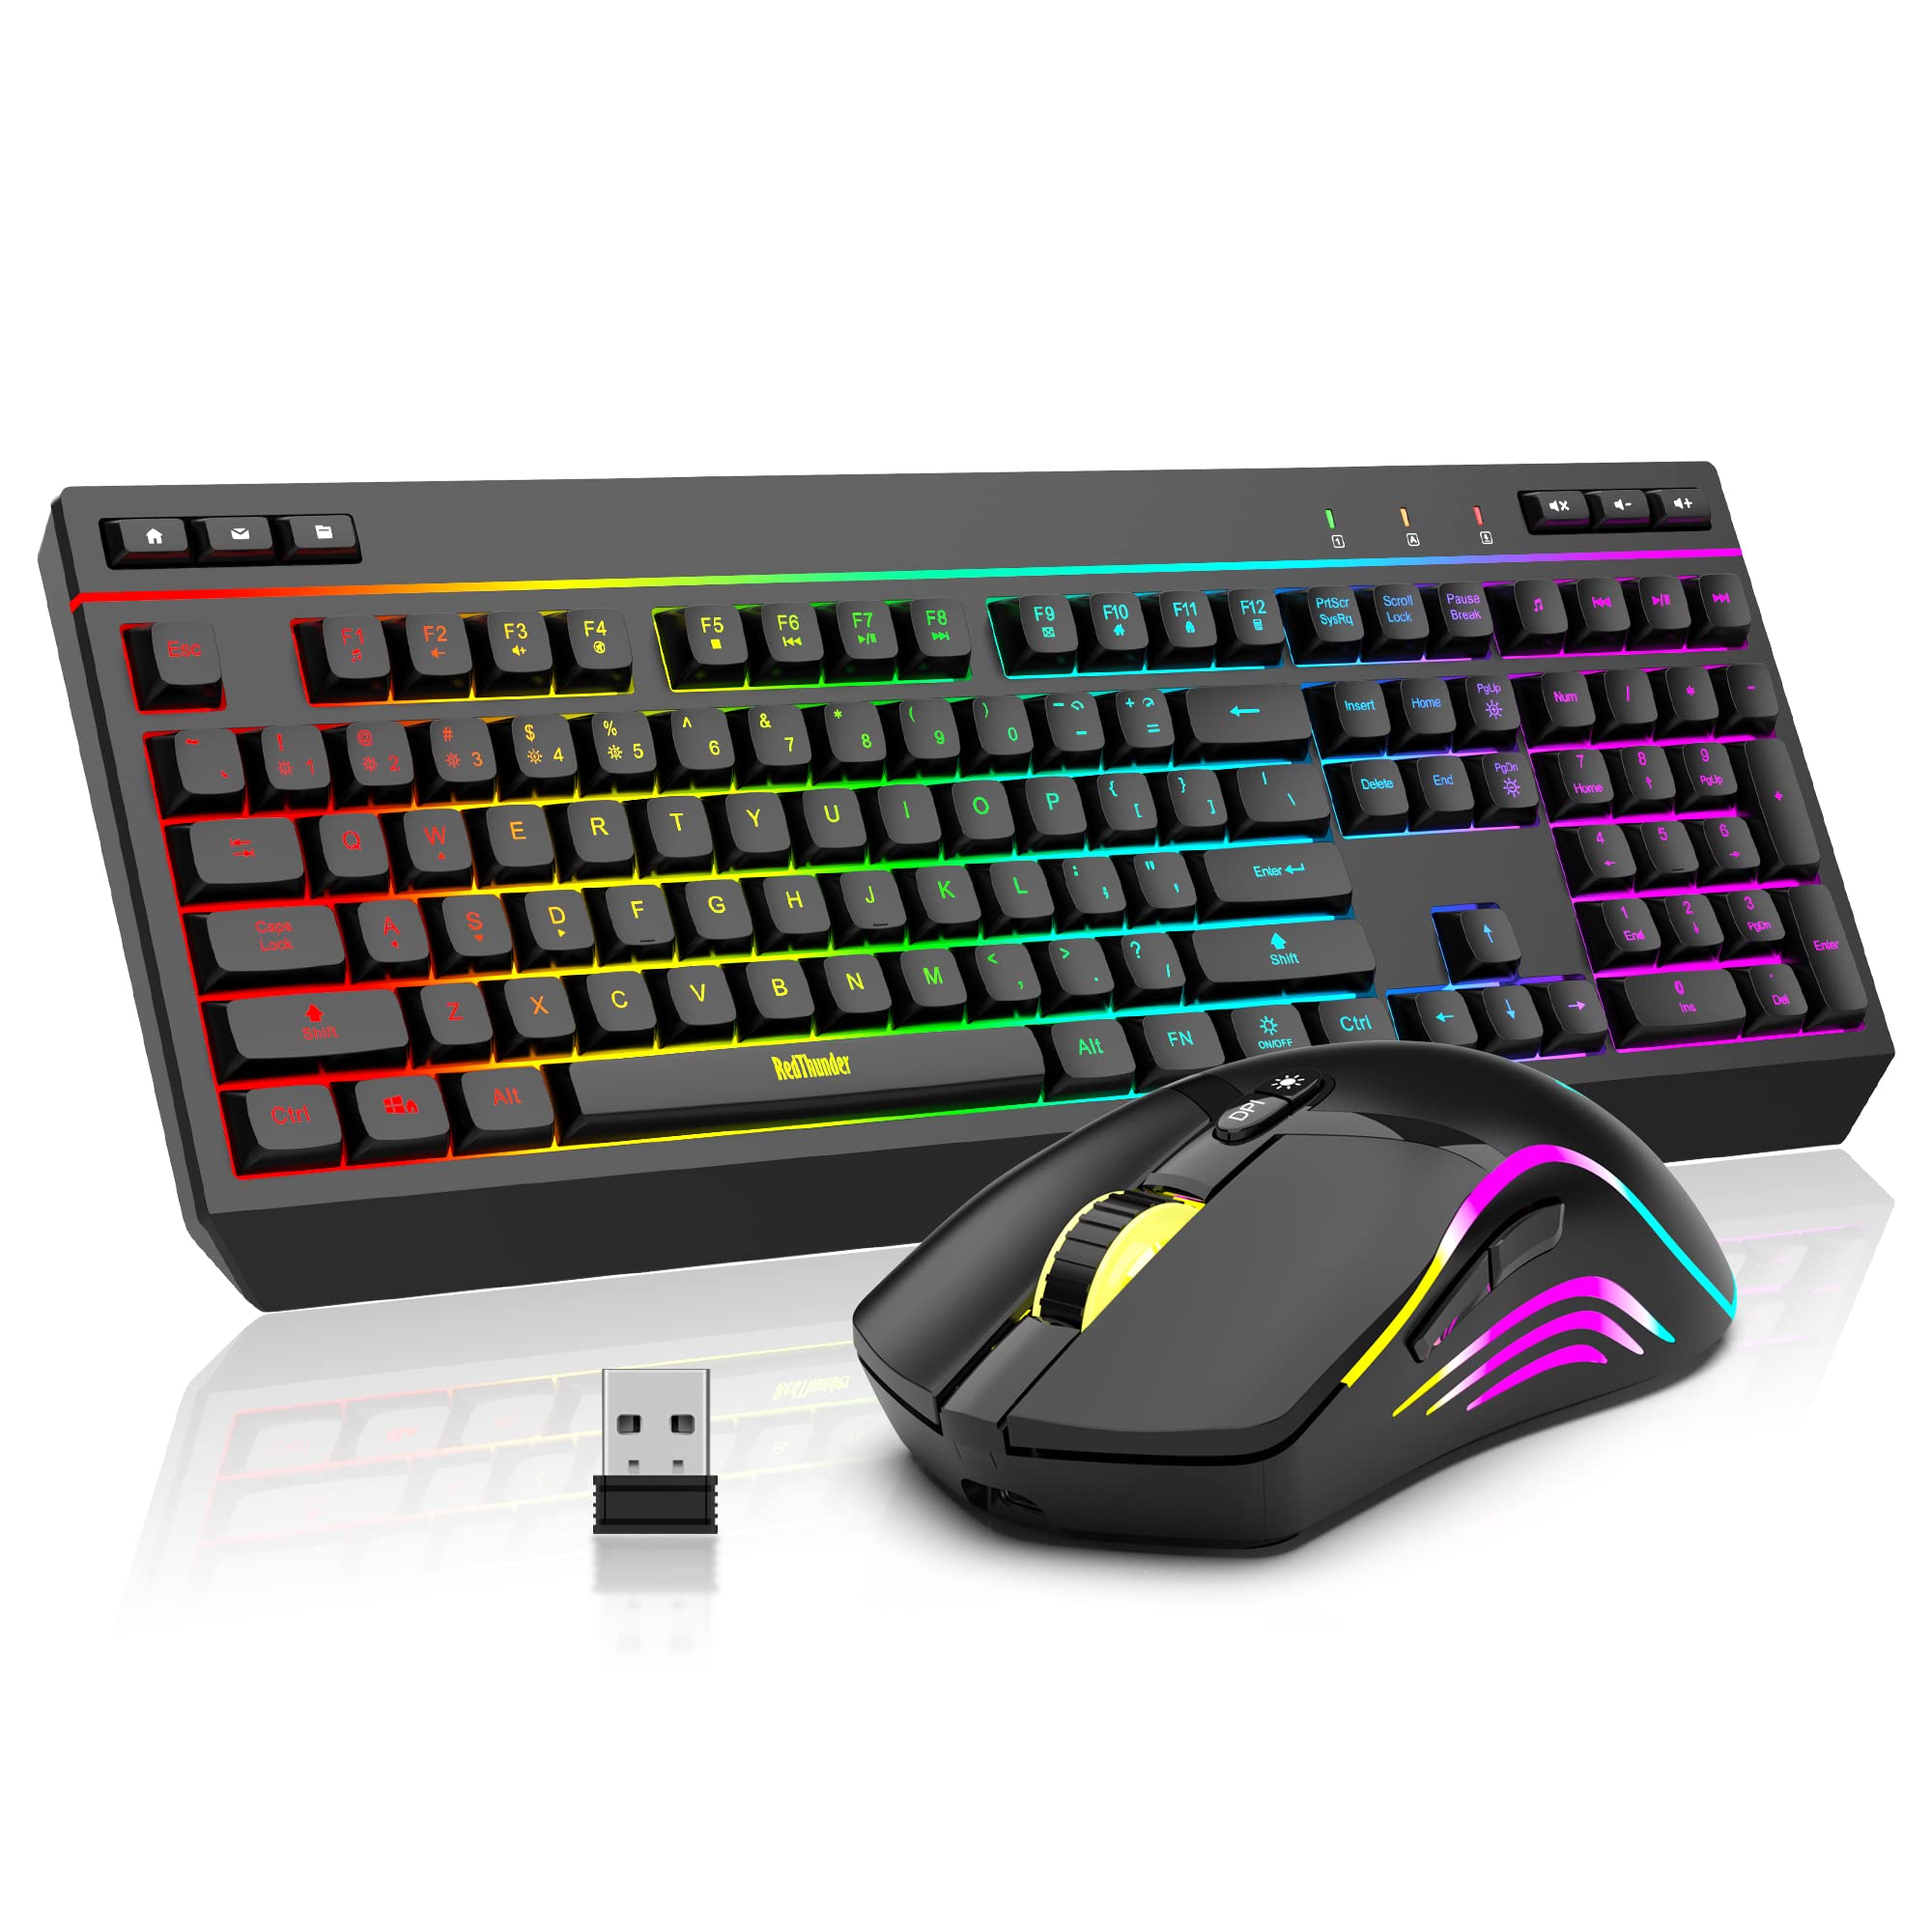 RedThunder K20 Wireless Keyboard and Mouse Combo Full Size Anti-Ghosting Keyboard with Multimedia Keys 7D 4800DPI Optical